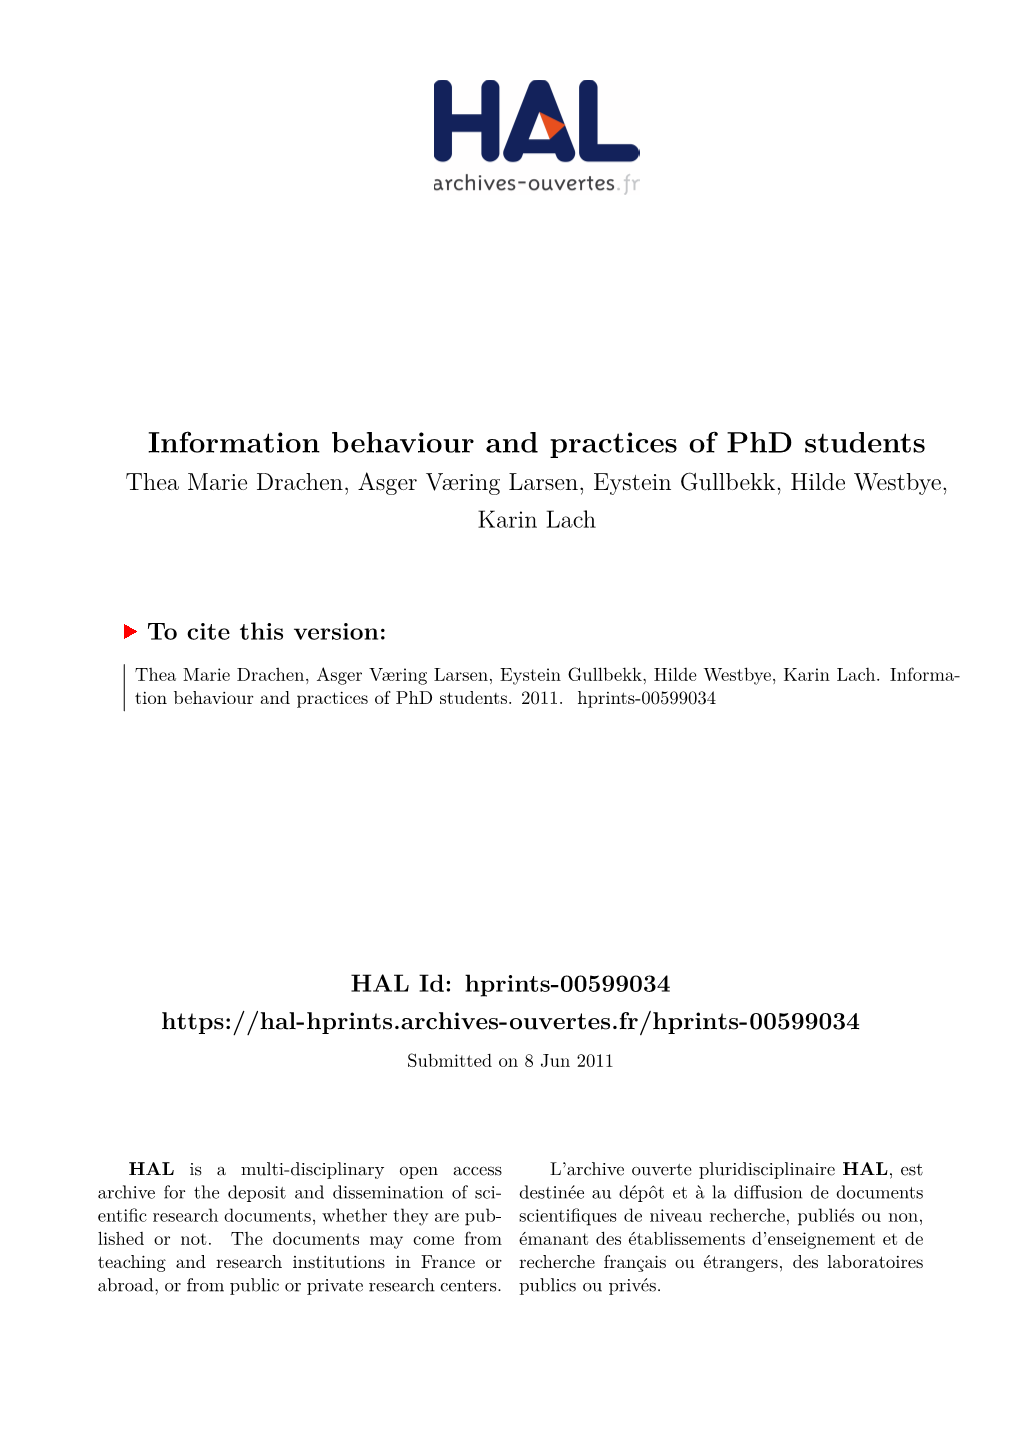 Information Behaviour and Practices of Phd Students Appendices